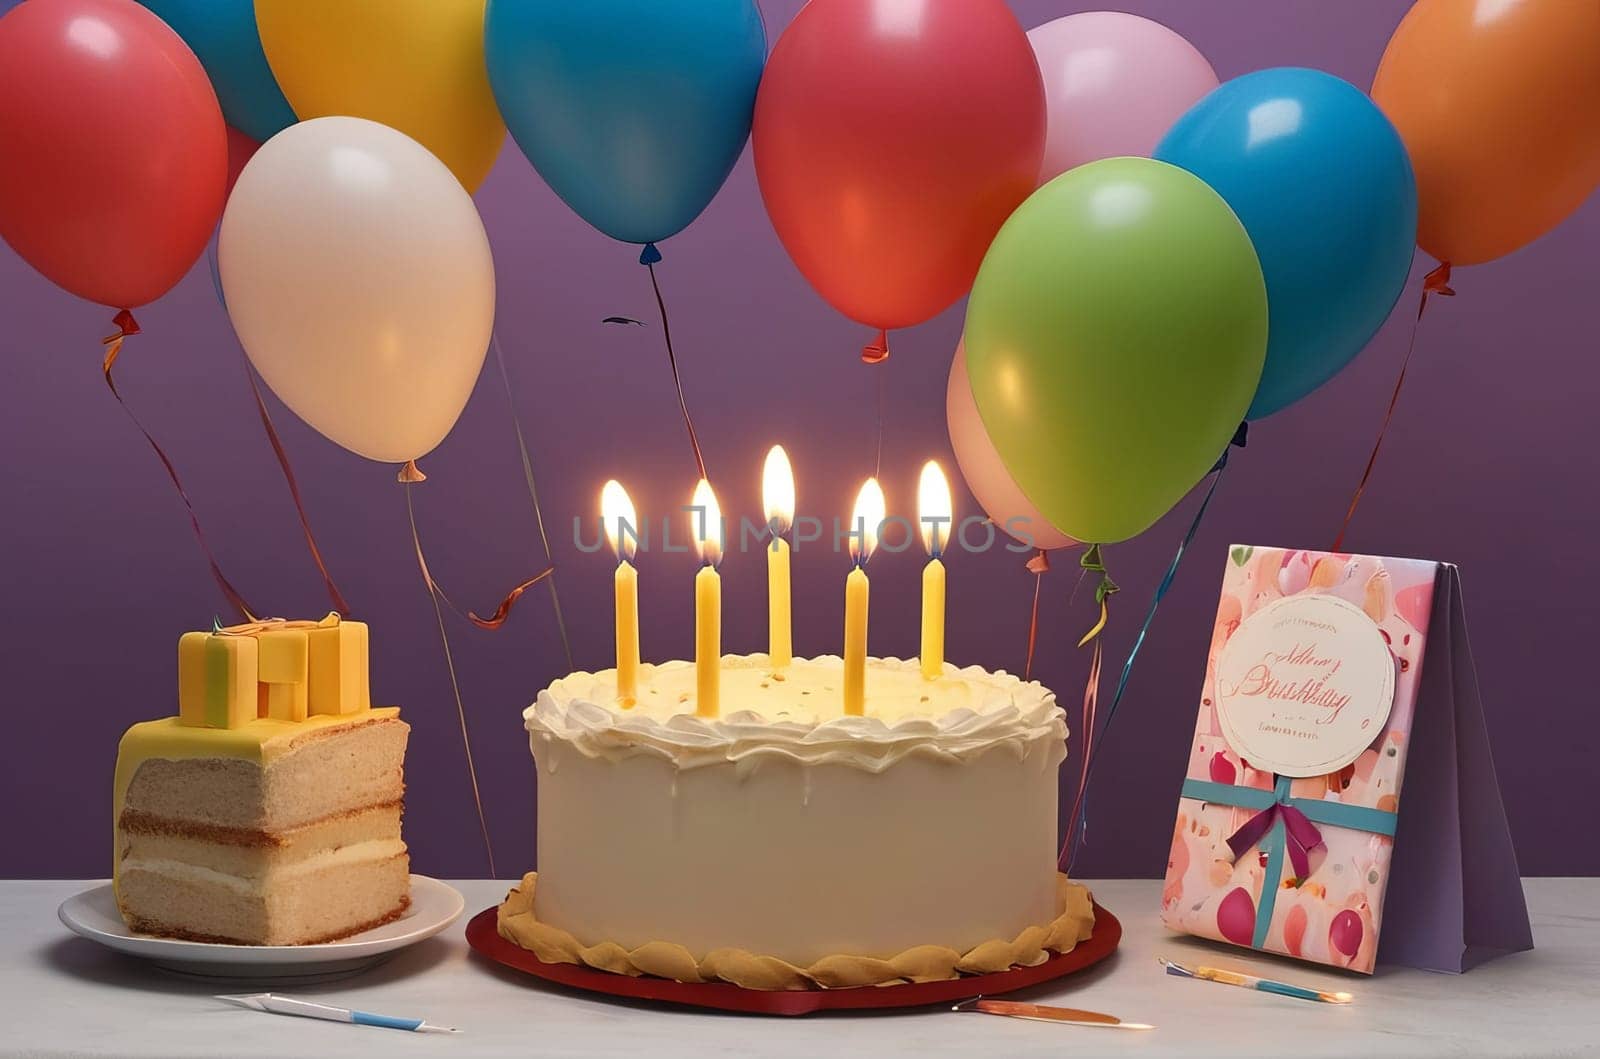 Birthday Bliss: A festive cake adorned with candles, set in a room decorated with balloons, radiating birthday joy and celebration.